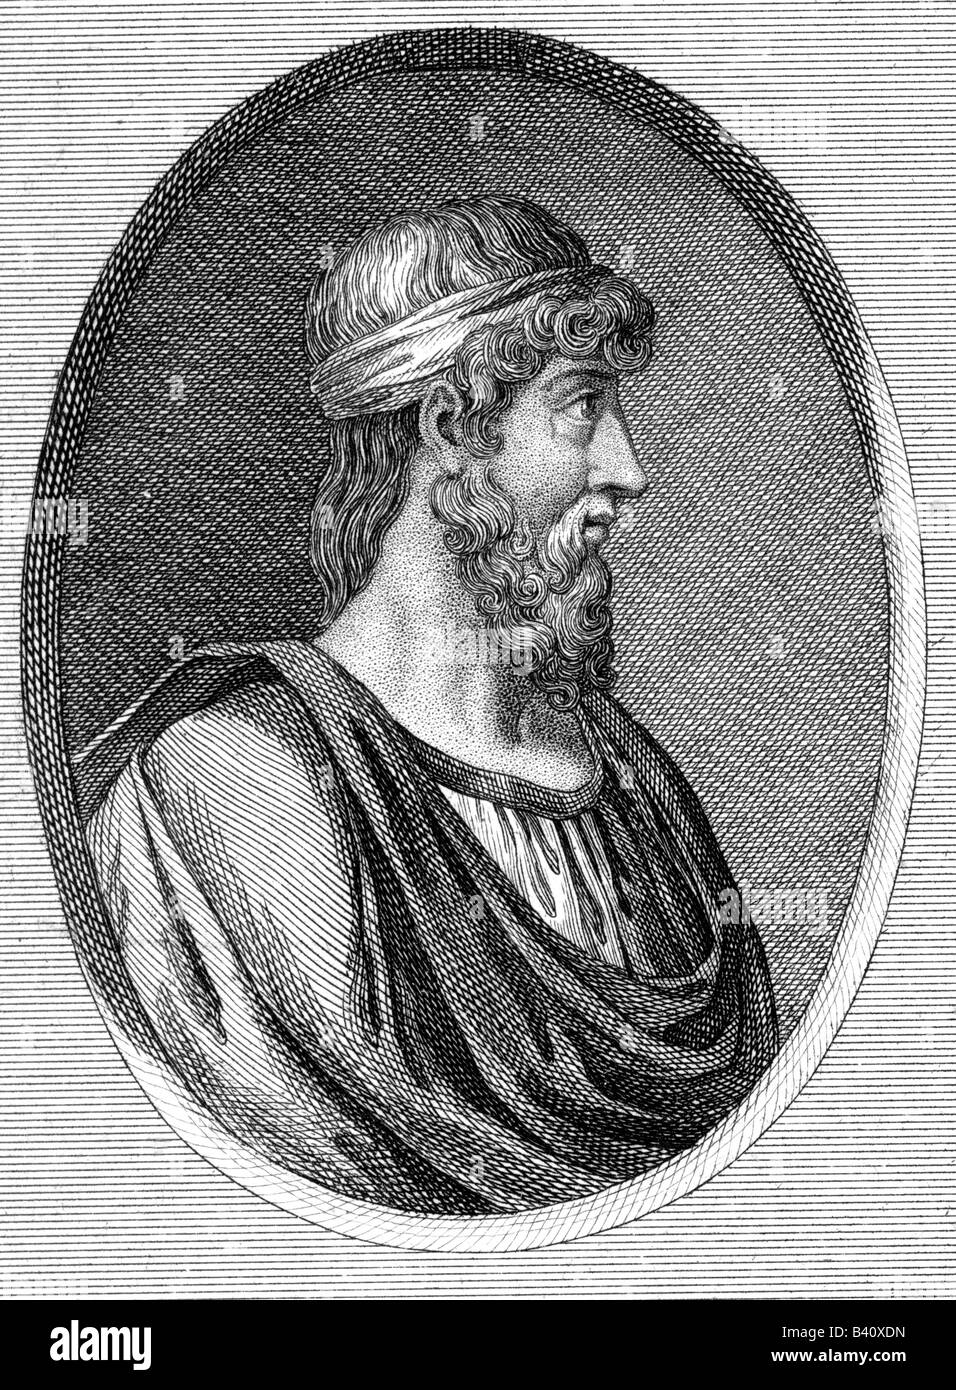 Plato, 427 BC - 347 BC, Greek philosopher, portrait, copper engraving, 18th century, Artist's Copyright has not to be cleared Stock Photo